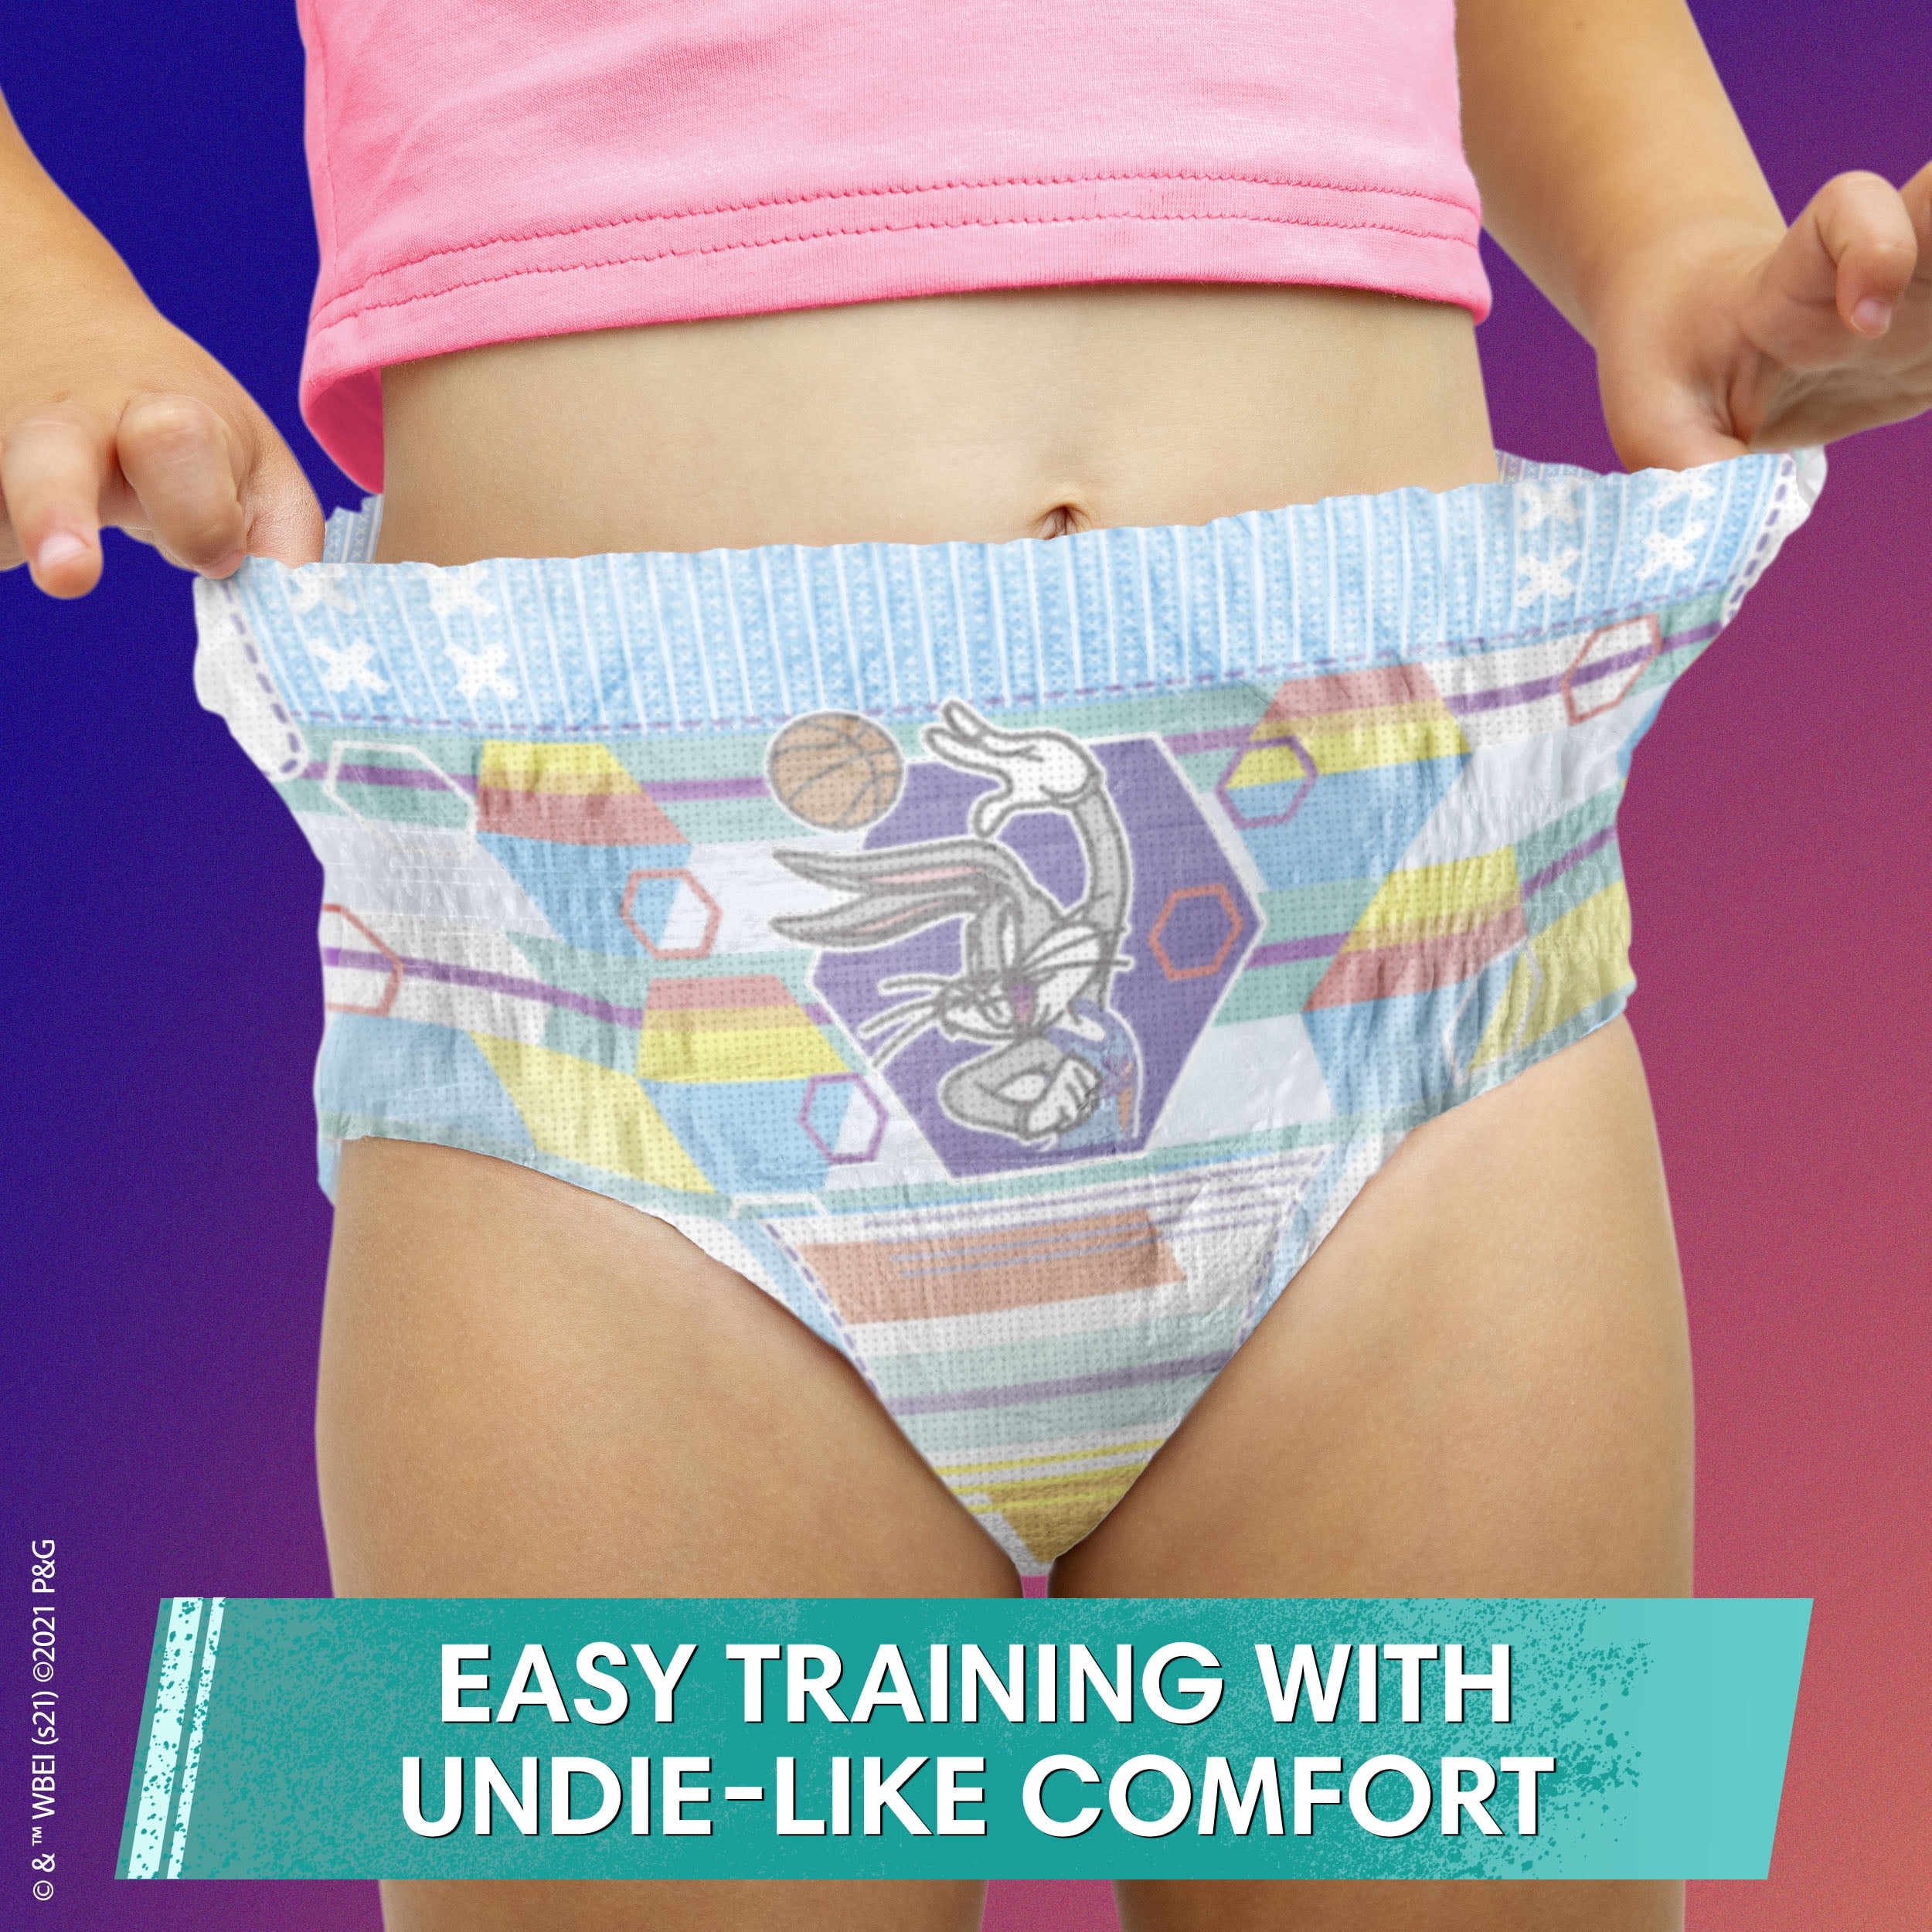 Pampers Easy Ups Unisex Training Underwear, 3T - 4T, 124 Count